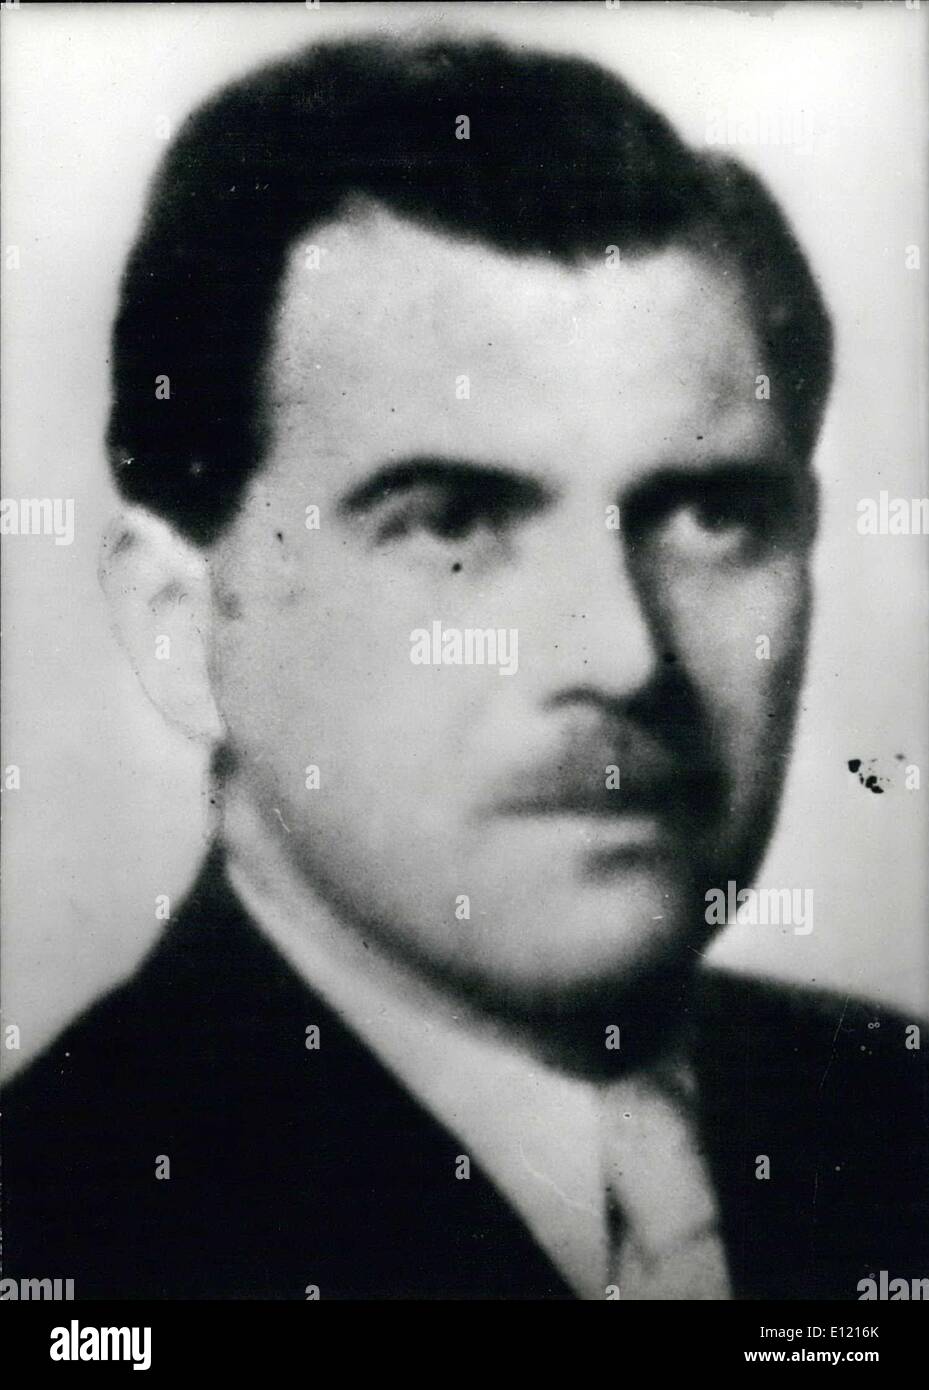 Jun. 16, 1981 - Joseph Mengele was a doctor in one of the Auschwitz concentration camps and was responsible for the deaths of thousands of people. To prove Hitler's theories on inferior races he used prisoners as guinea pigs and inflicted the worst tortures on them. A refugee for 35 years in South America, he might be extradited from Paraguay and sent to Germany. A mandate for his arrest was just sent out by German authorities. Stock Photo